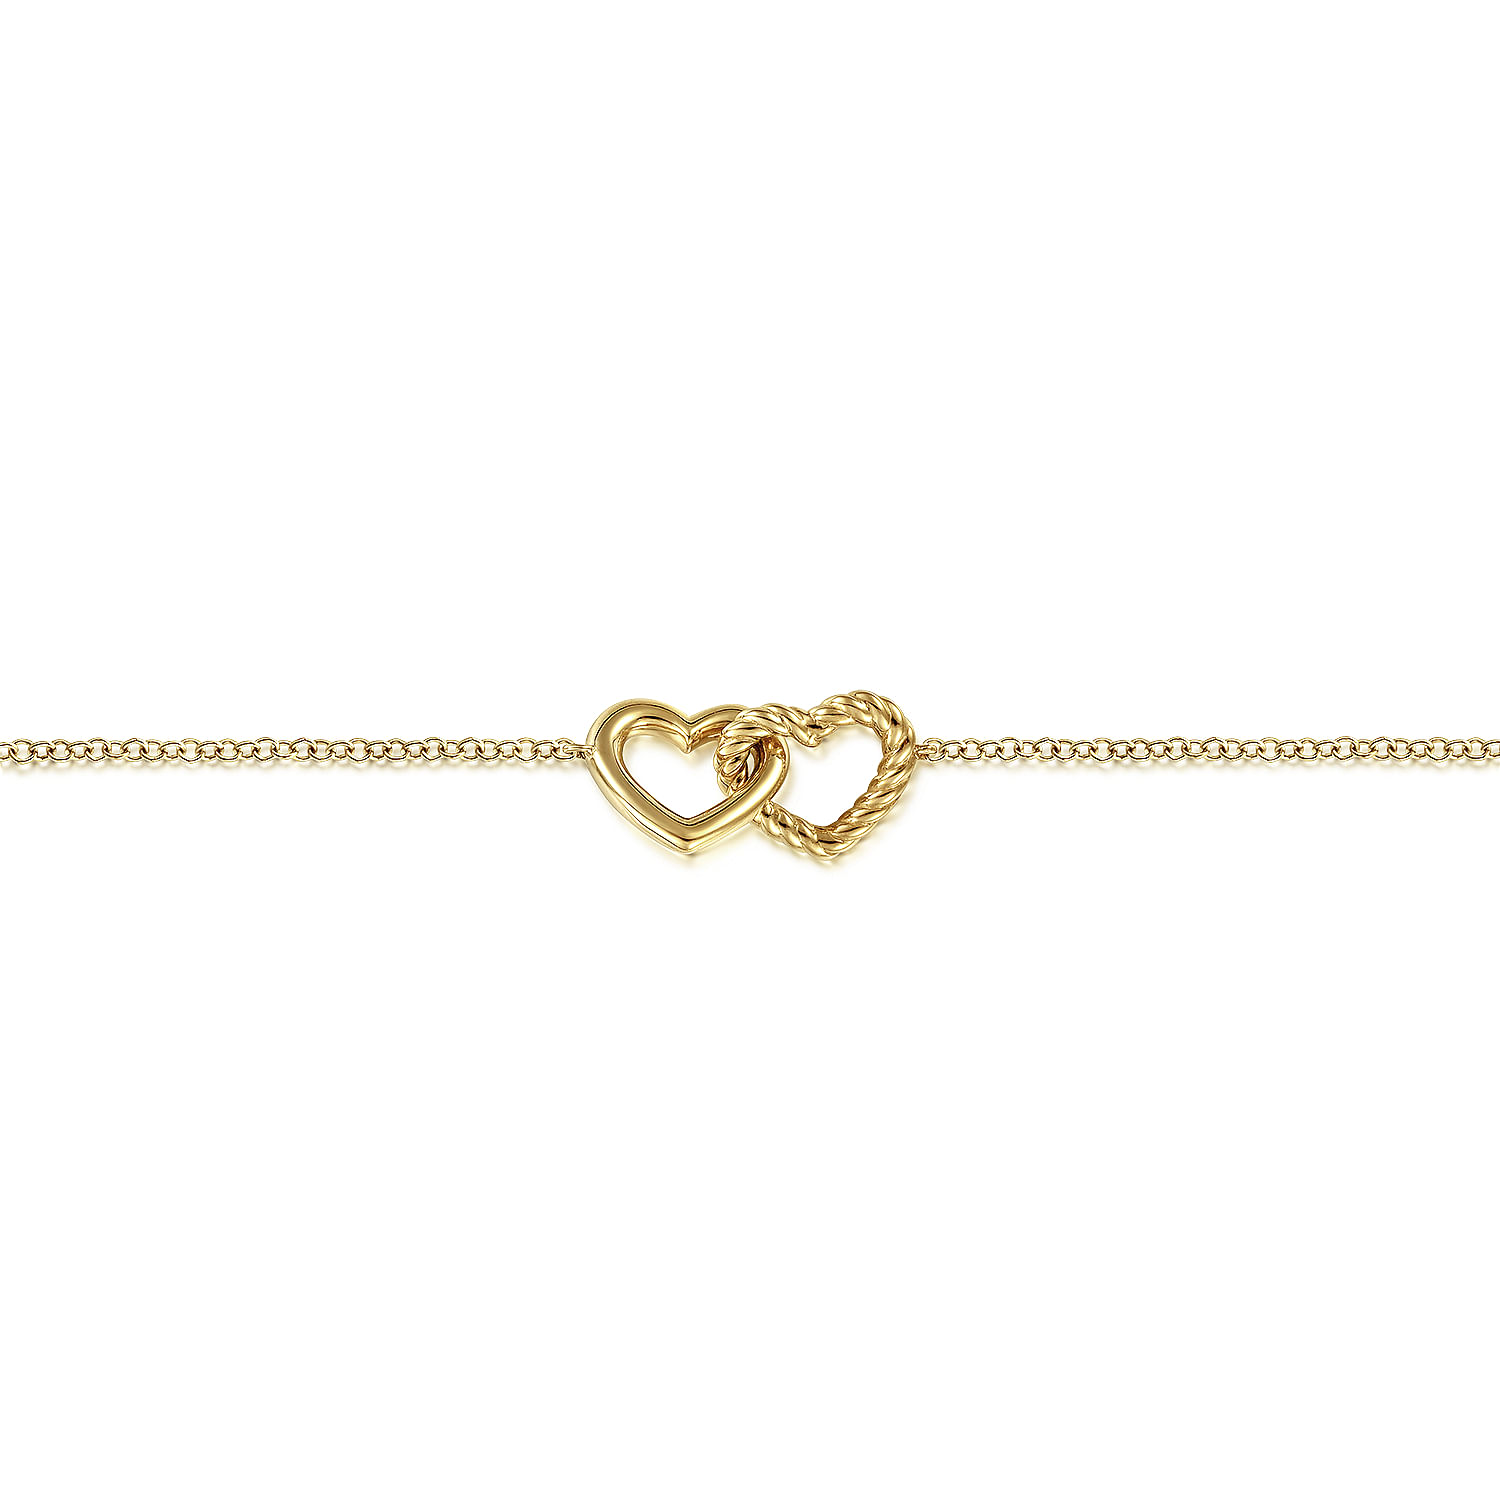 14K Yellow Gold Chain Bracelet with Entwined Hearts